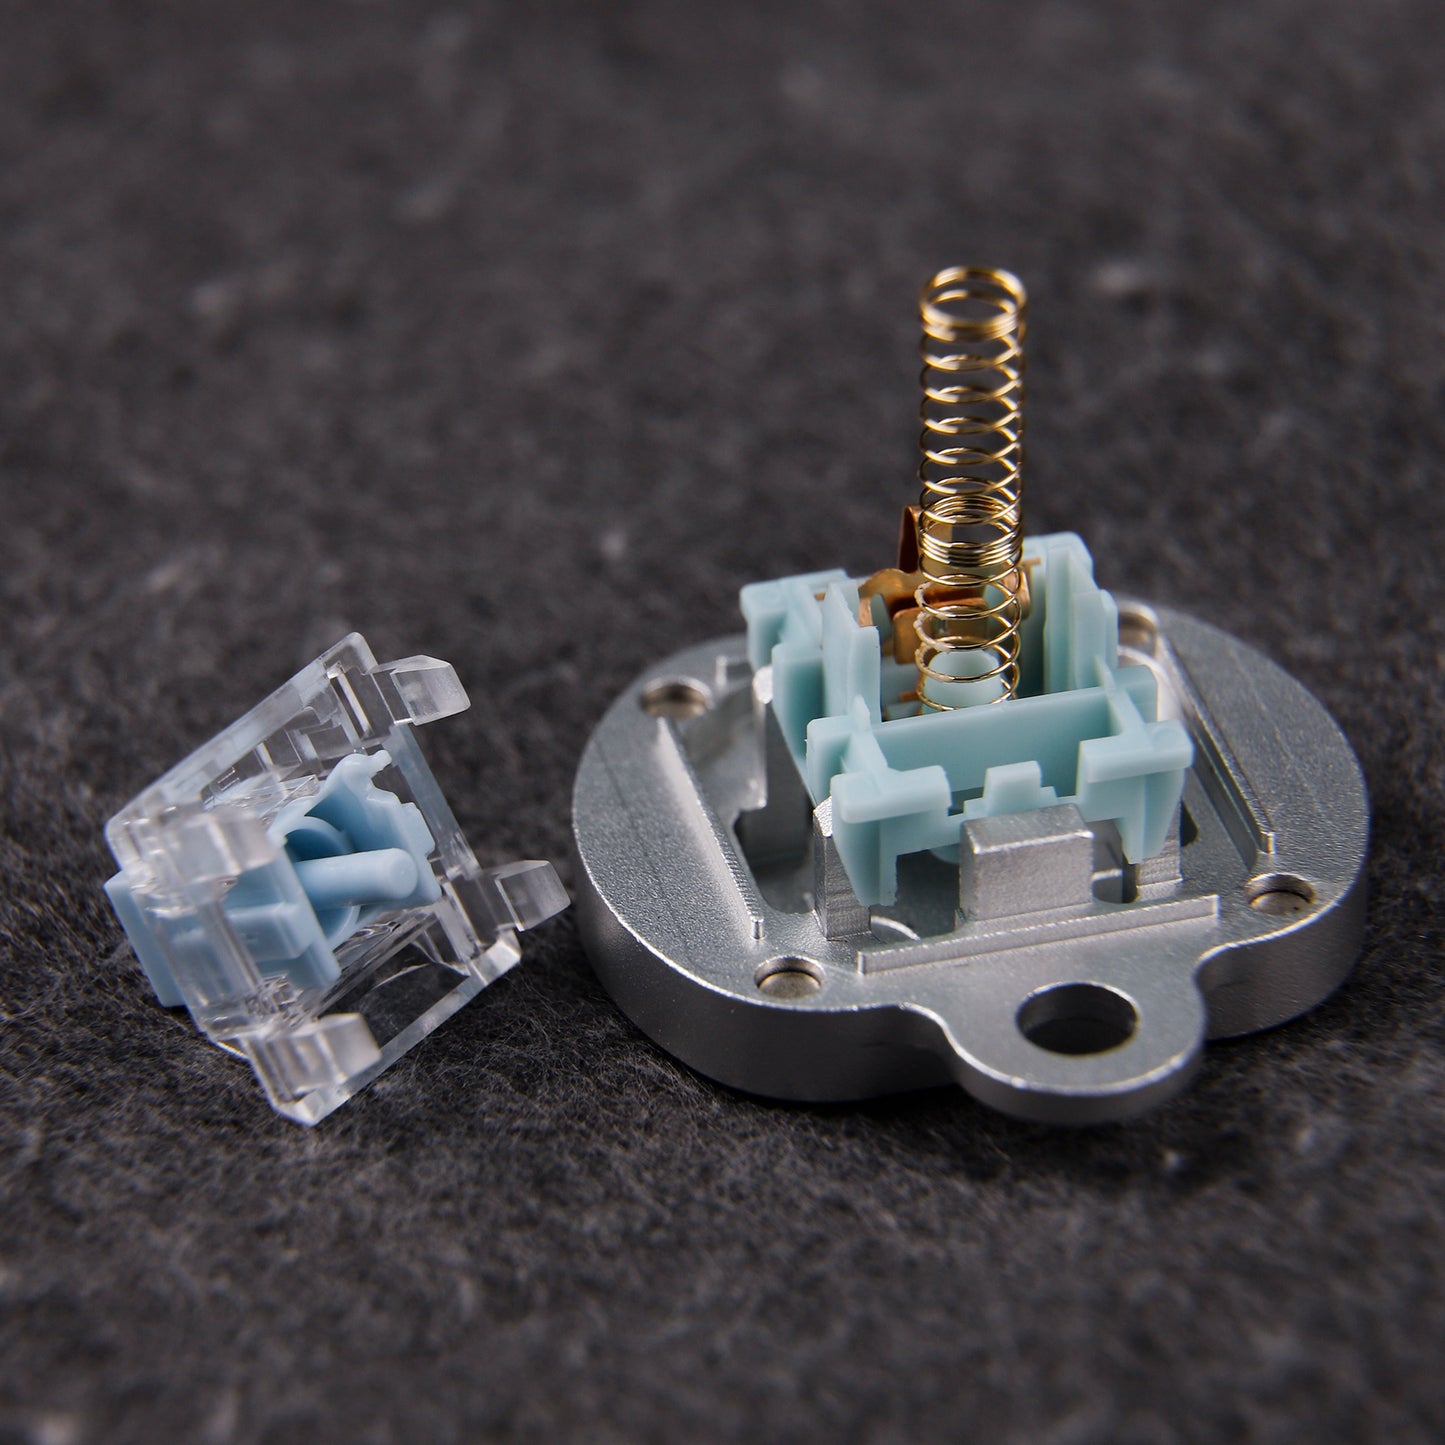 TTC BLUISH WHITE(SMD 3 Pin 42g Tactile Switches)